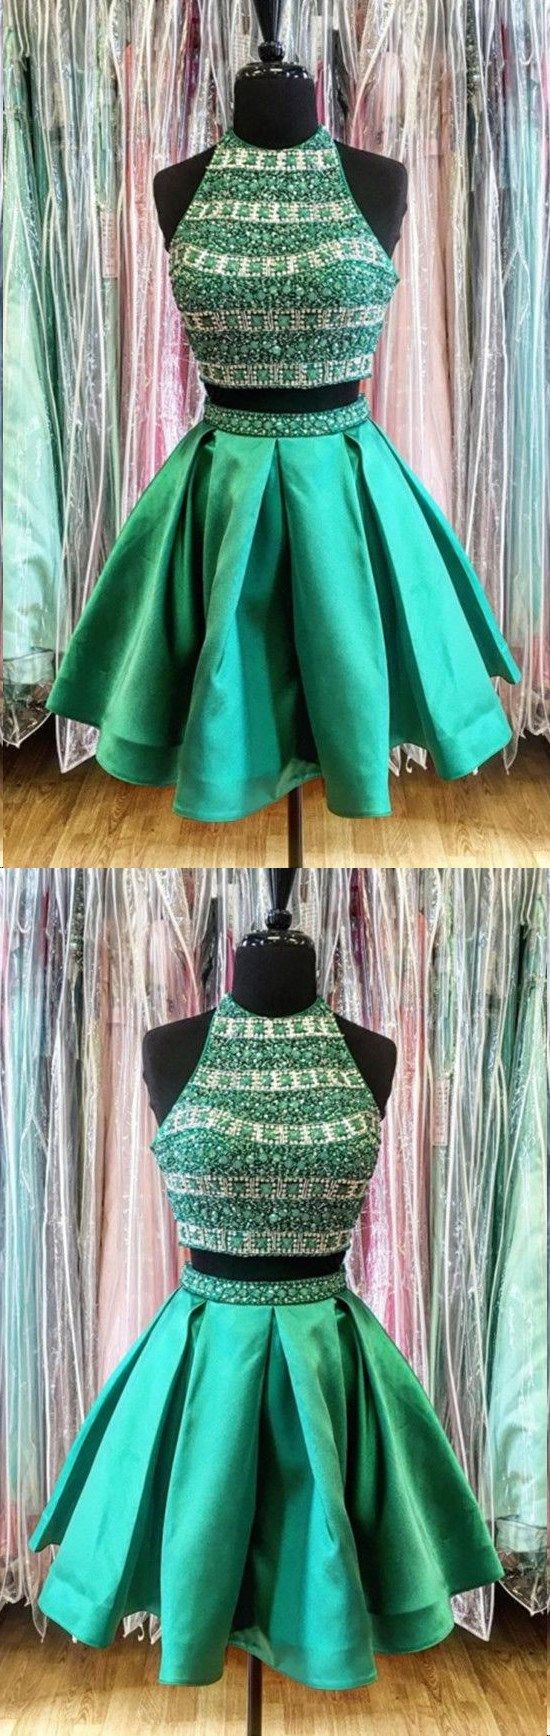 Two Piece Homecoming Dresses Hunter Green Sparkly Short Prom Dress Party Dress M5108